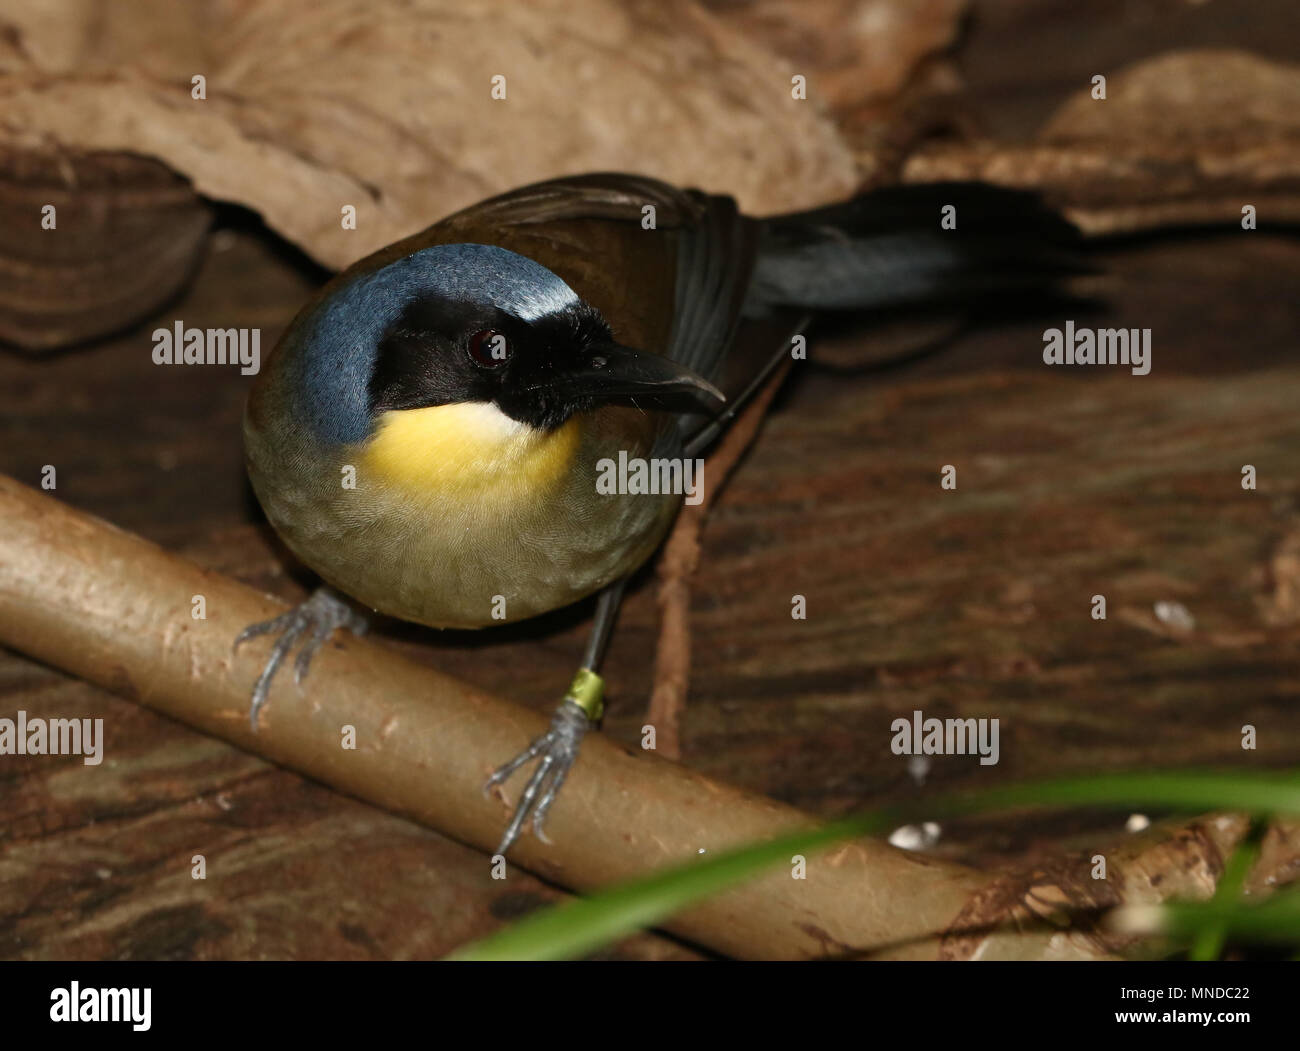 Chinese Blue-crowned laughingthrush a.k.a. Courtois's laughingbird (Garrulax courtoisi, Dryonastes courtoisi) in closeup Stock Photo